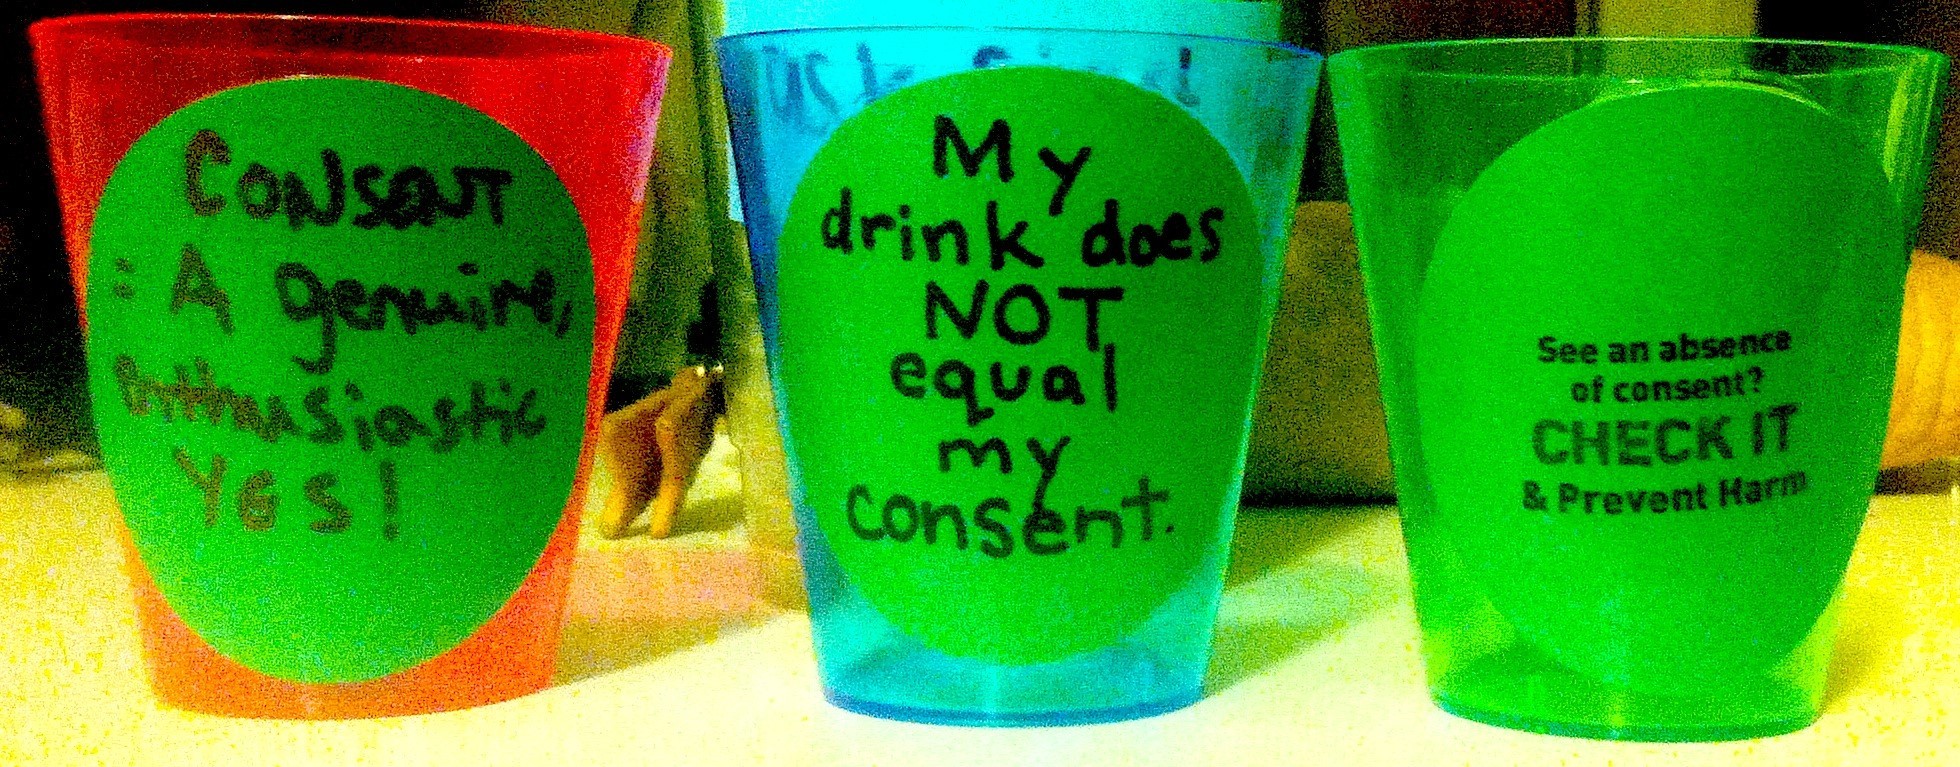 Shot glasses displaying pro-consent slogans. - CHECK IT'S FACEBOOK PAGE